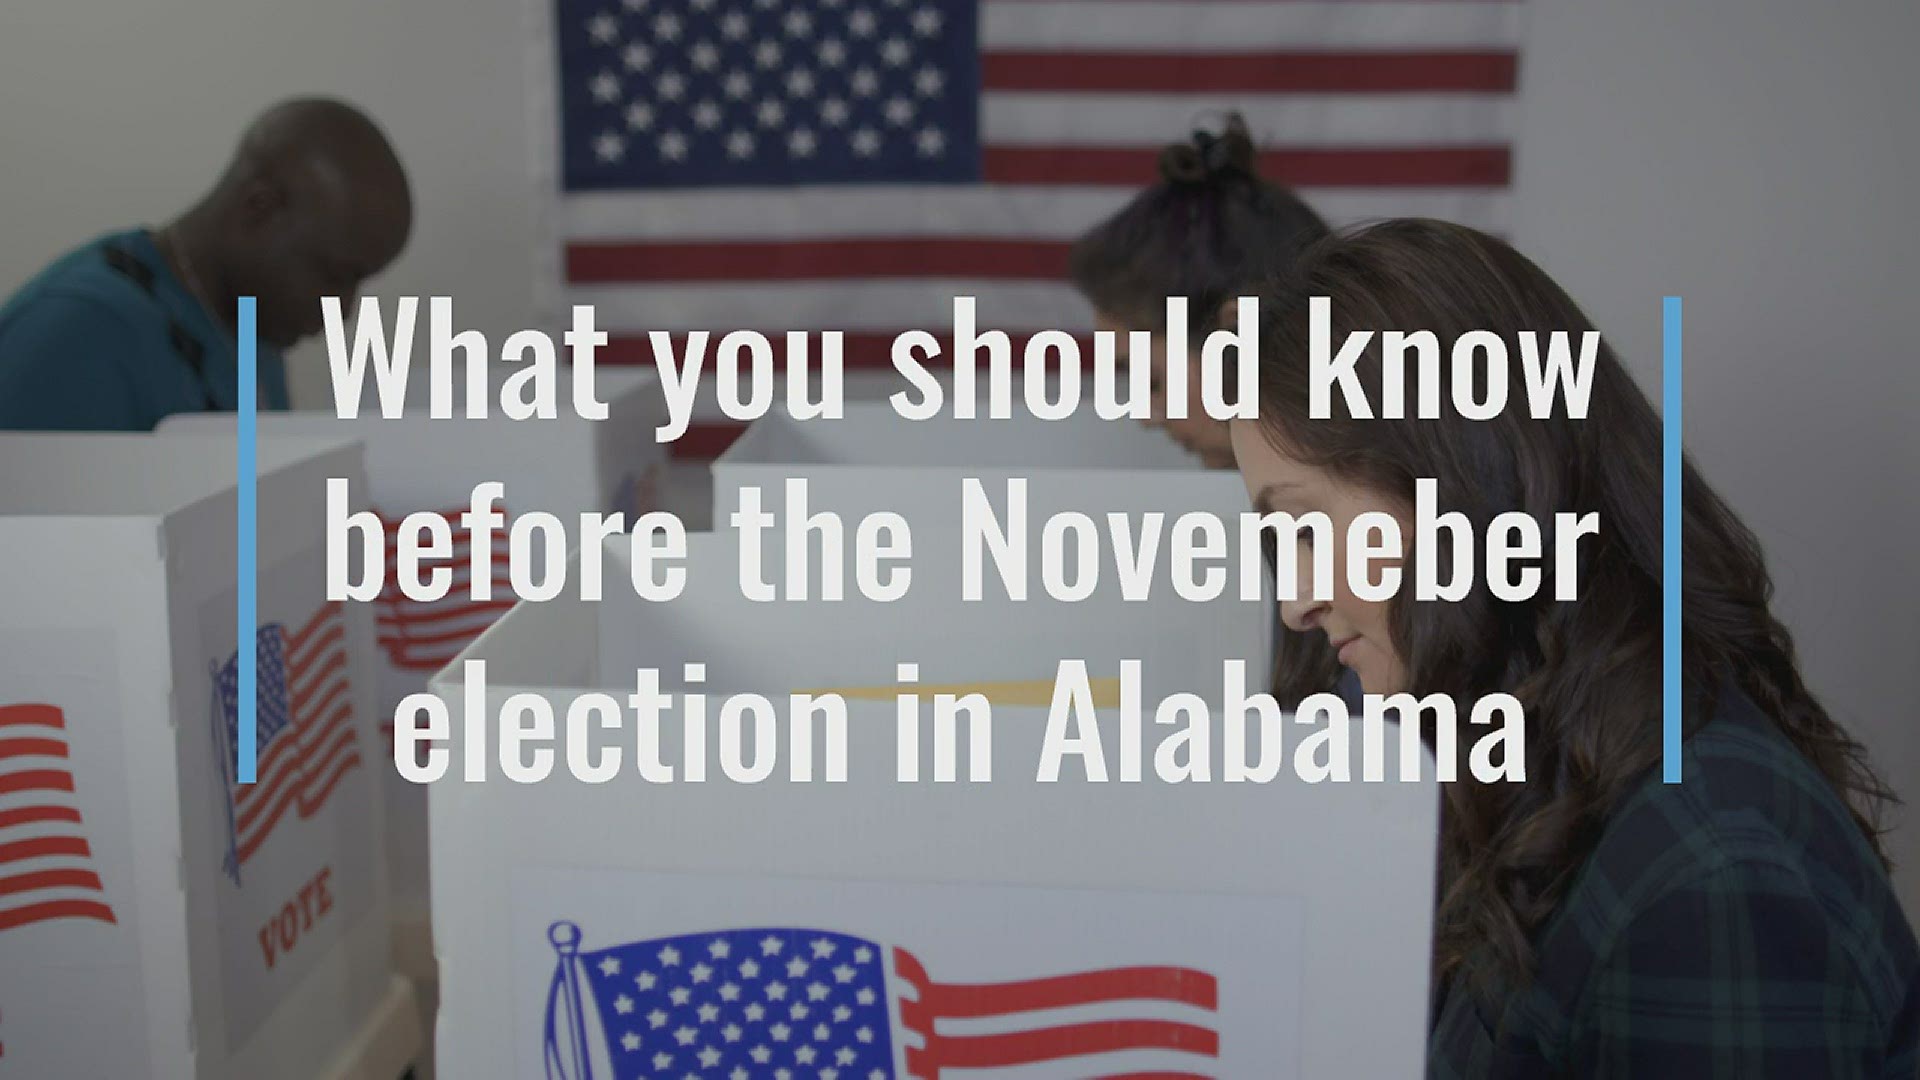 Important information for the 2020 general election in Alabama.